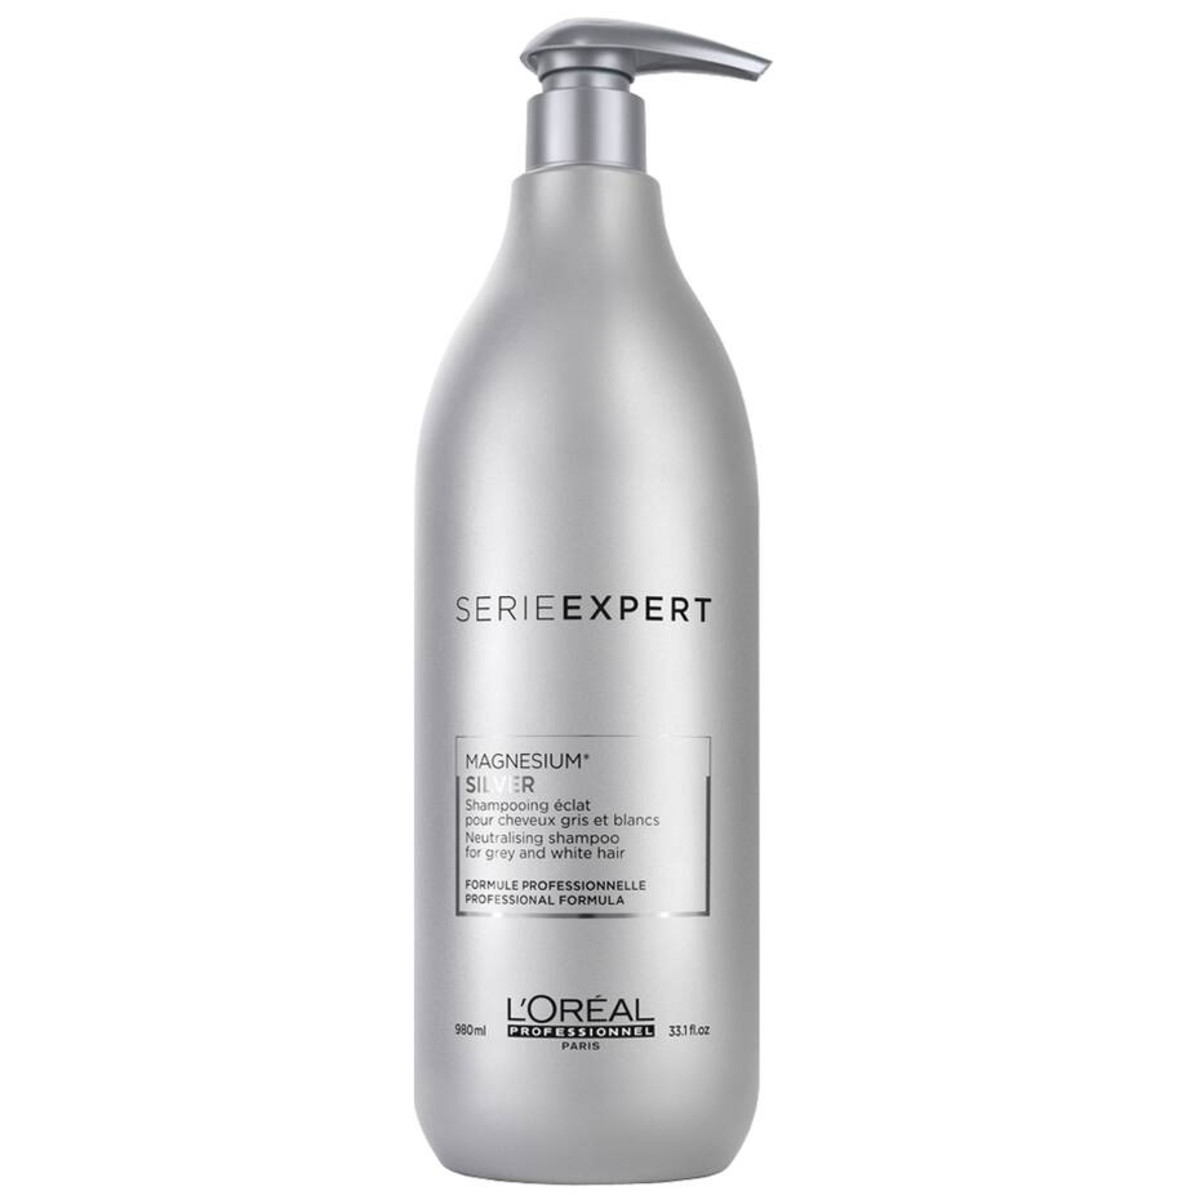 L'Oréal Professionnel Serie Expert Silver Shampoo ($55.03 $33.02 CAD at lorealbeautyoutlet.ca*)